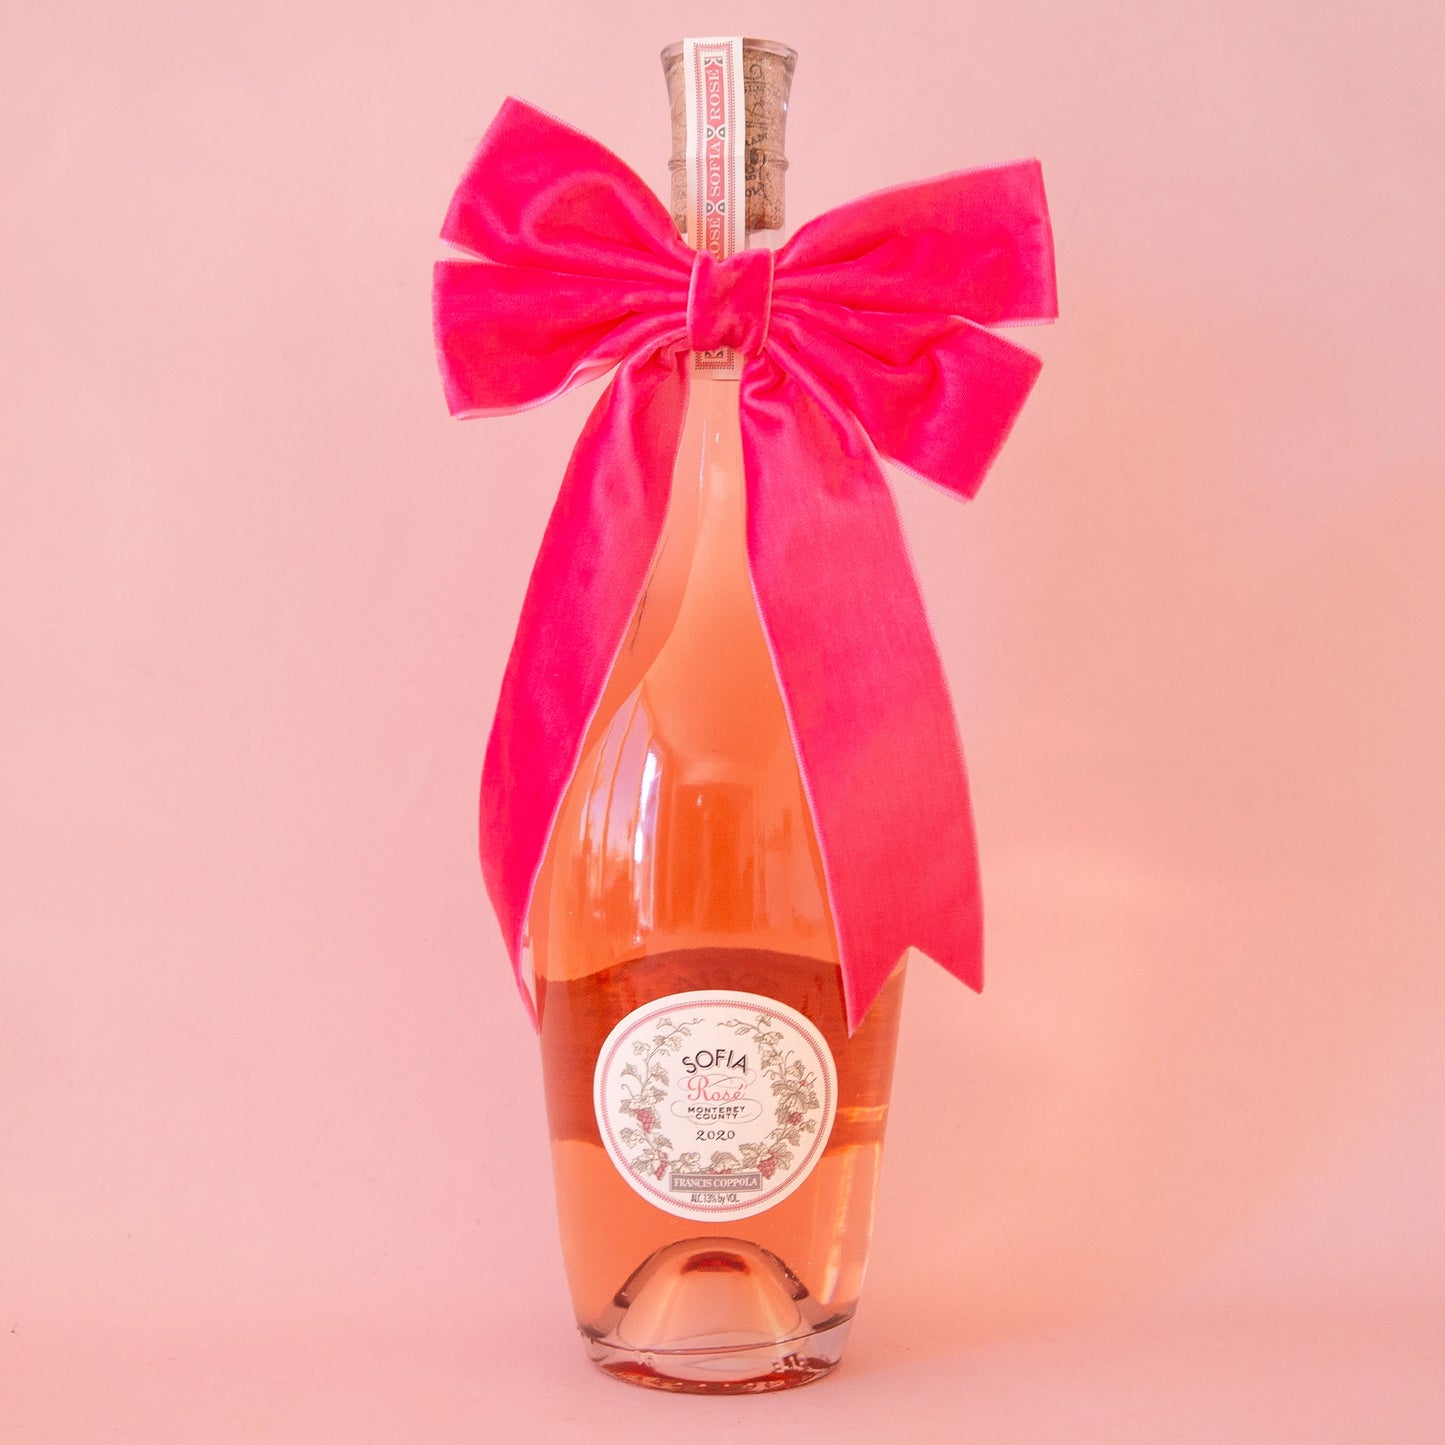  On a peachy background is a wine bottle with a large velvet pink bow.